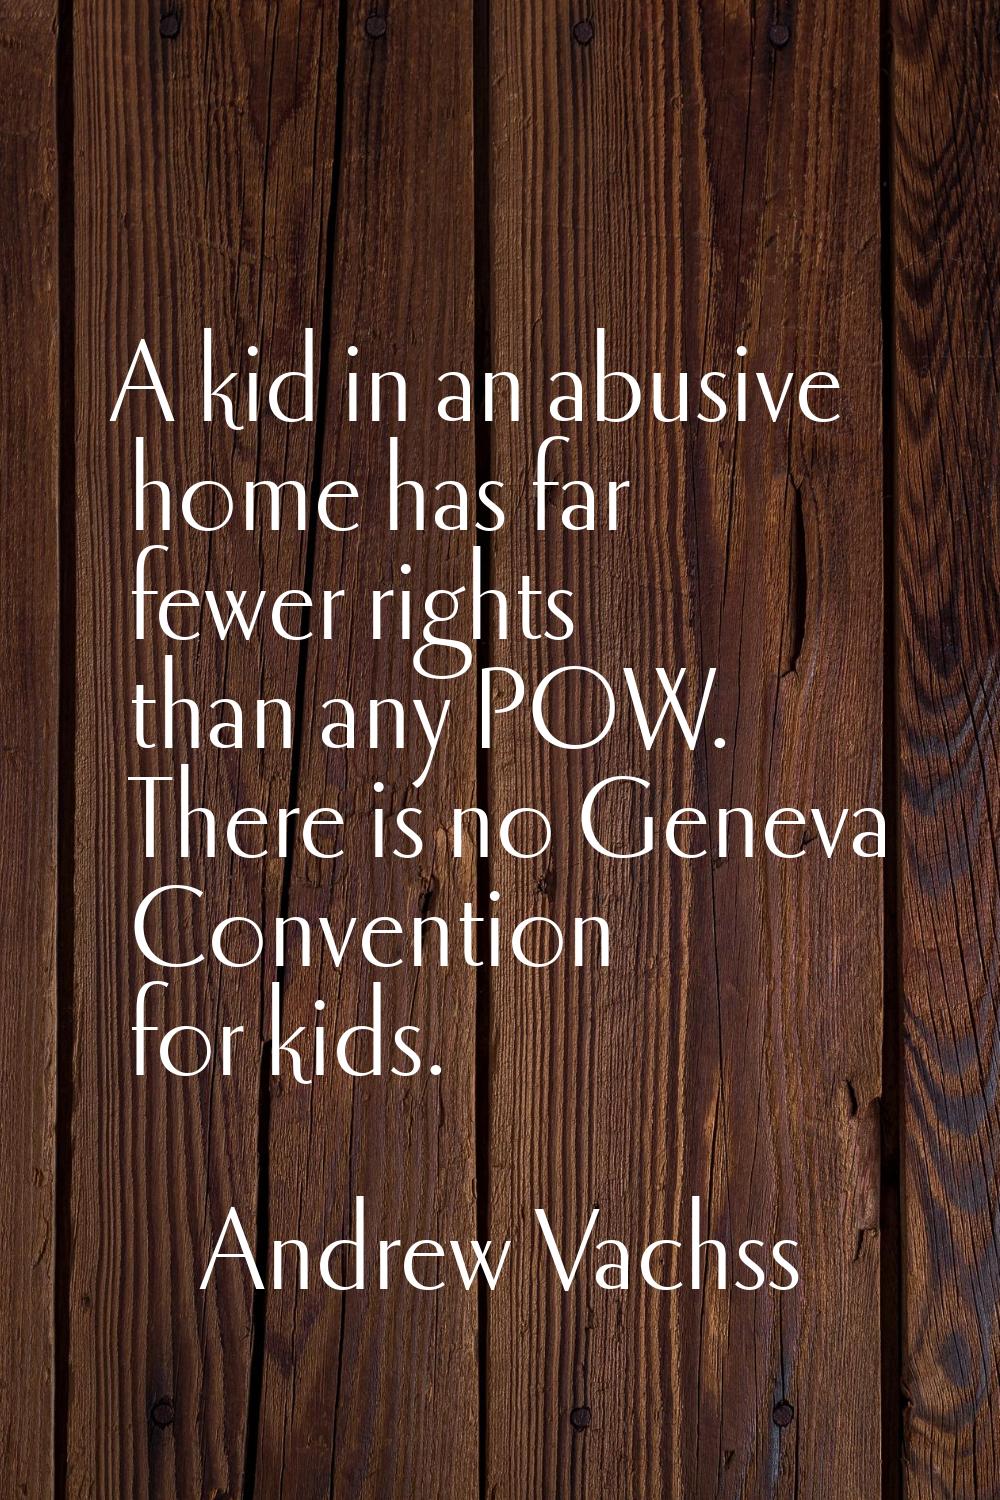 A kid in an abusive home has far fewer rights than any POW. There is no Geneva Convention for kids.